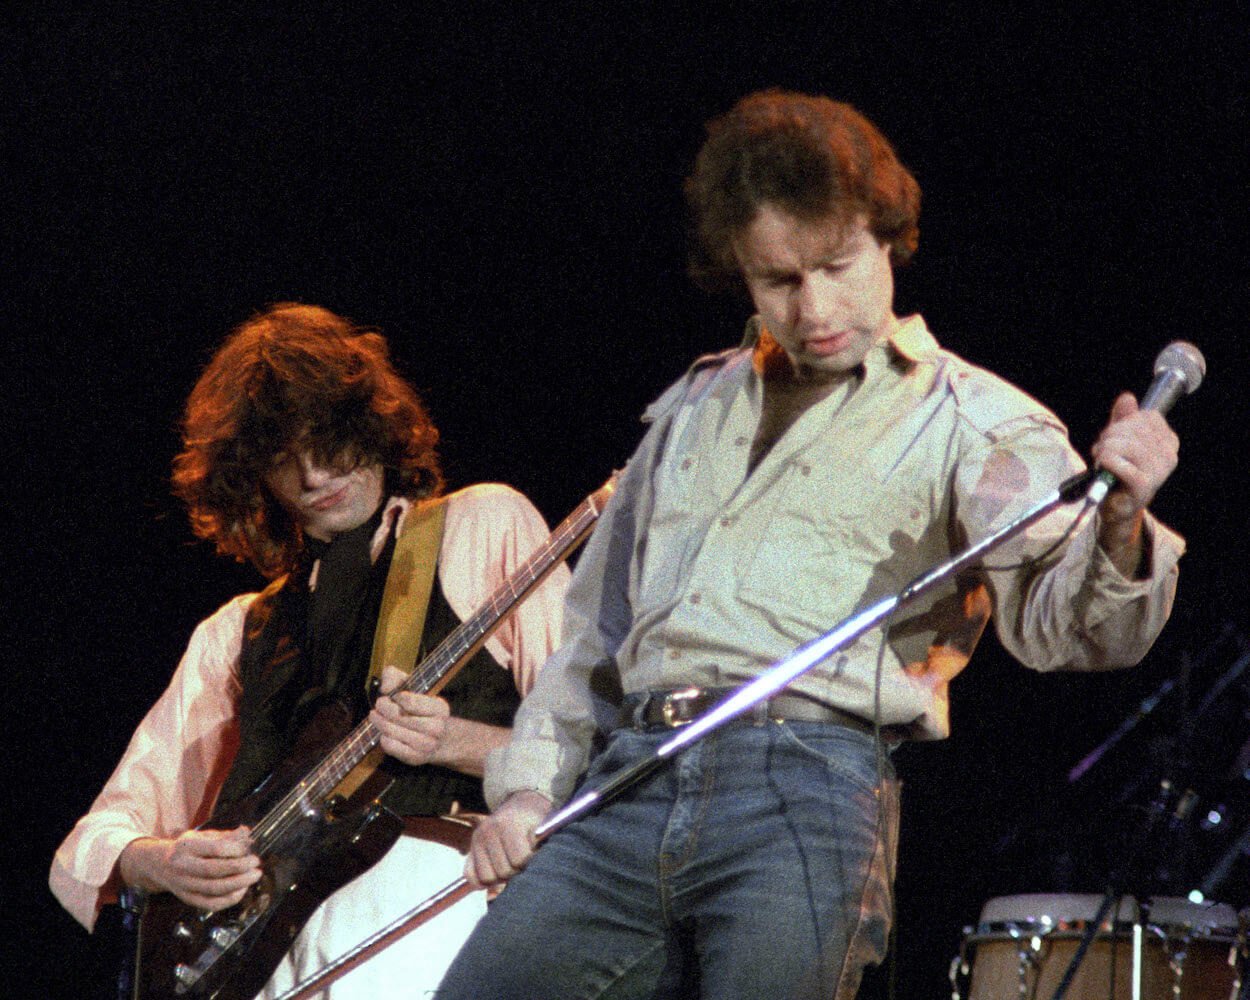 Jimmy Page (left) playing guitar and Paul Rodgers holding a microphone stand during an ARMS (Action into Research for Multiple Sclerosis) benefit concert.